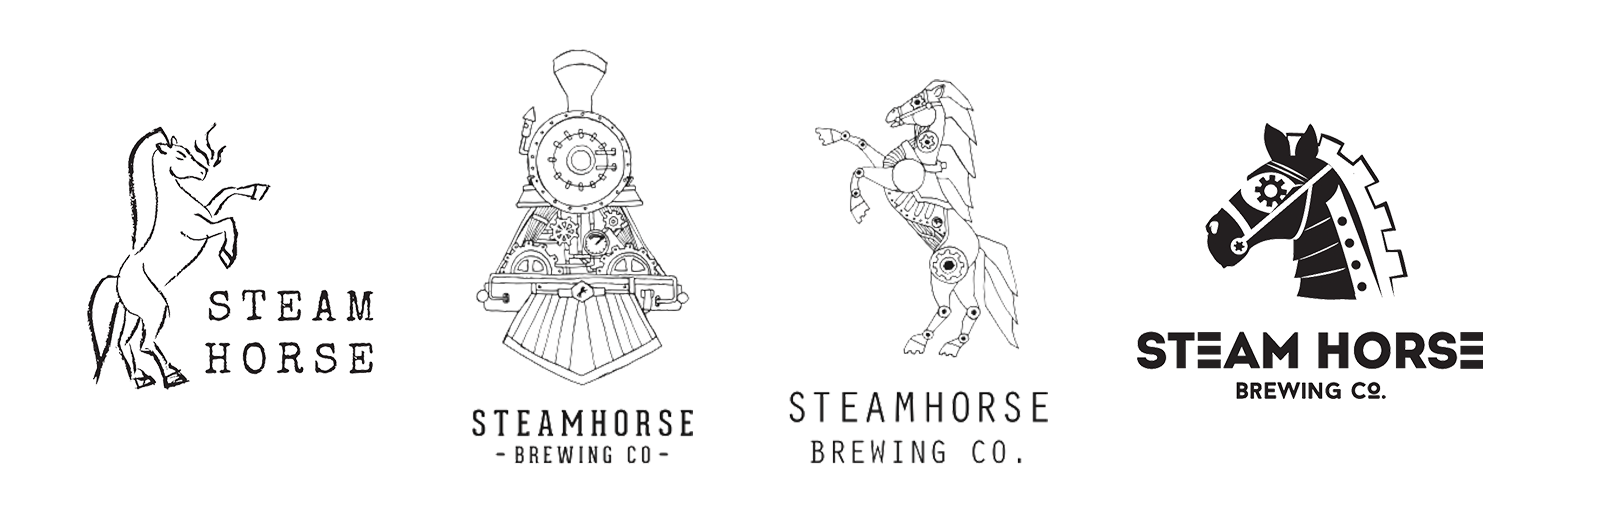 Steamhorse Brewing Co. logo explorations.